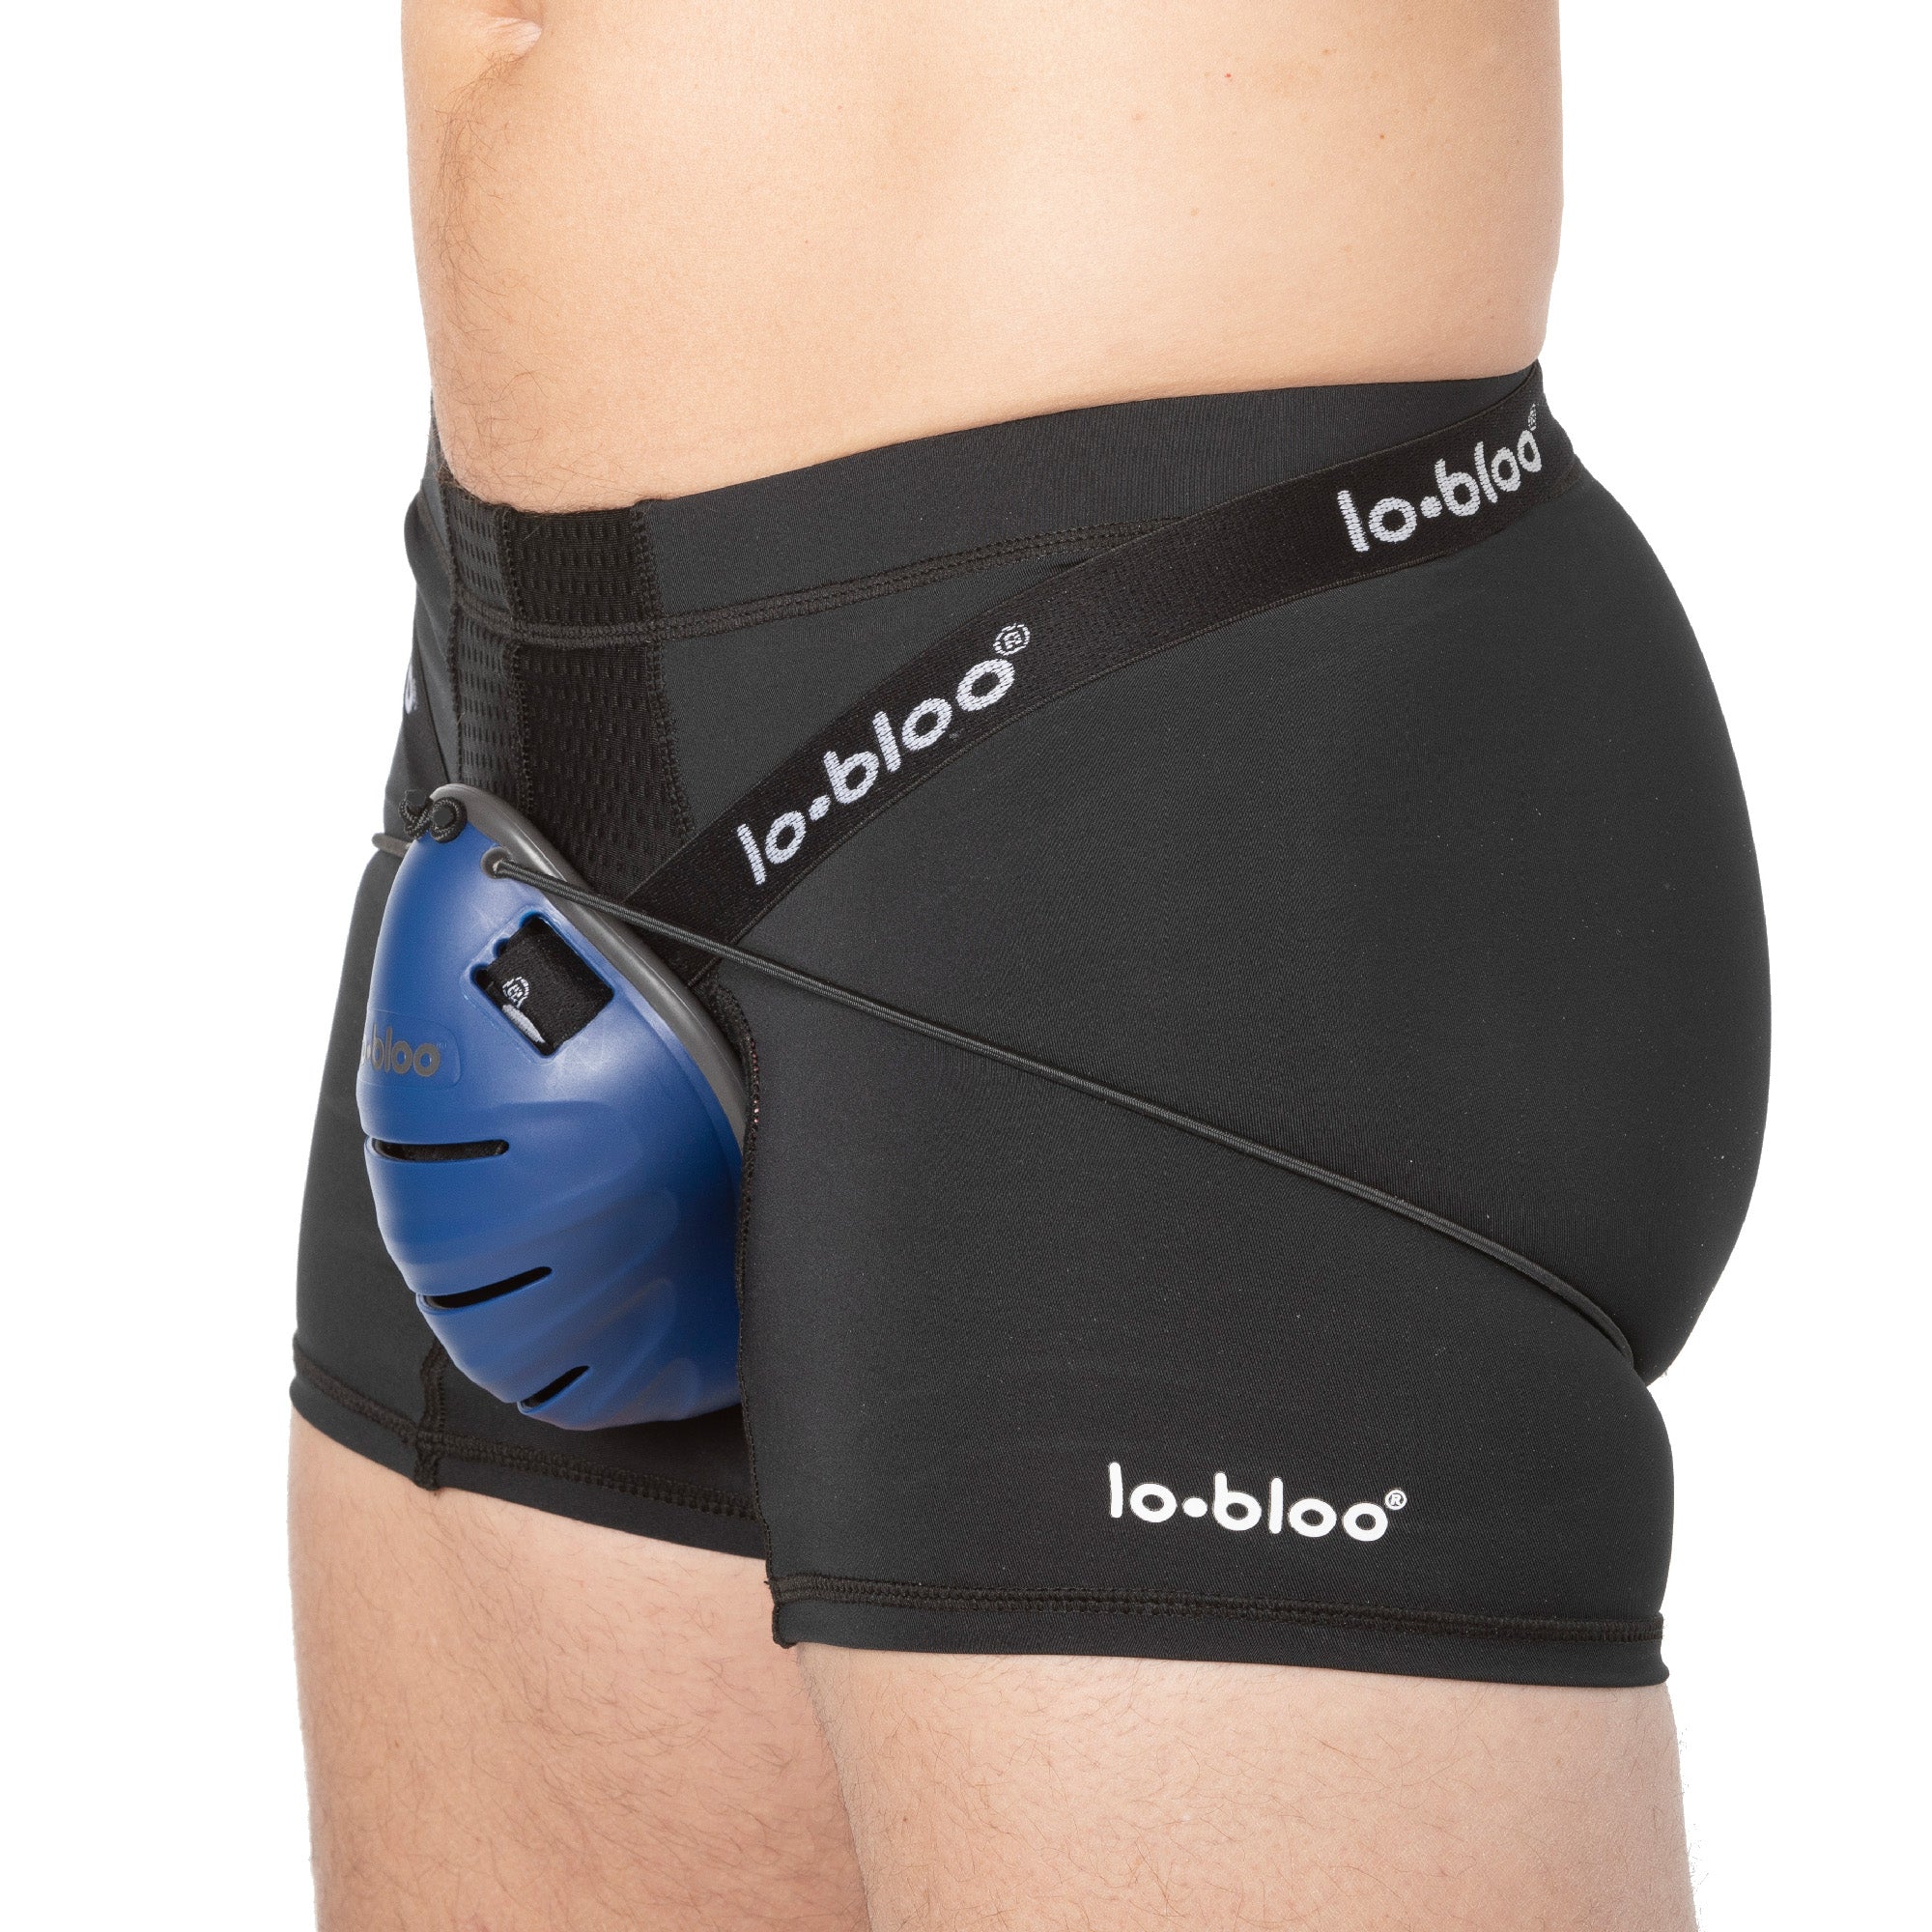 lobloo® FREE athletic groin cup